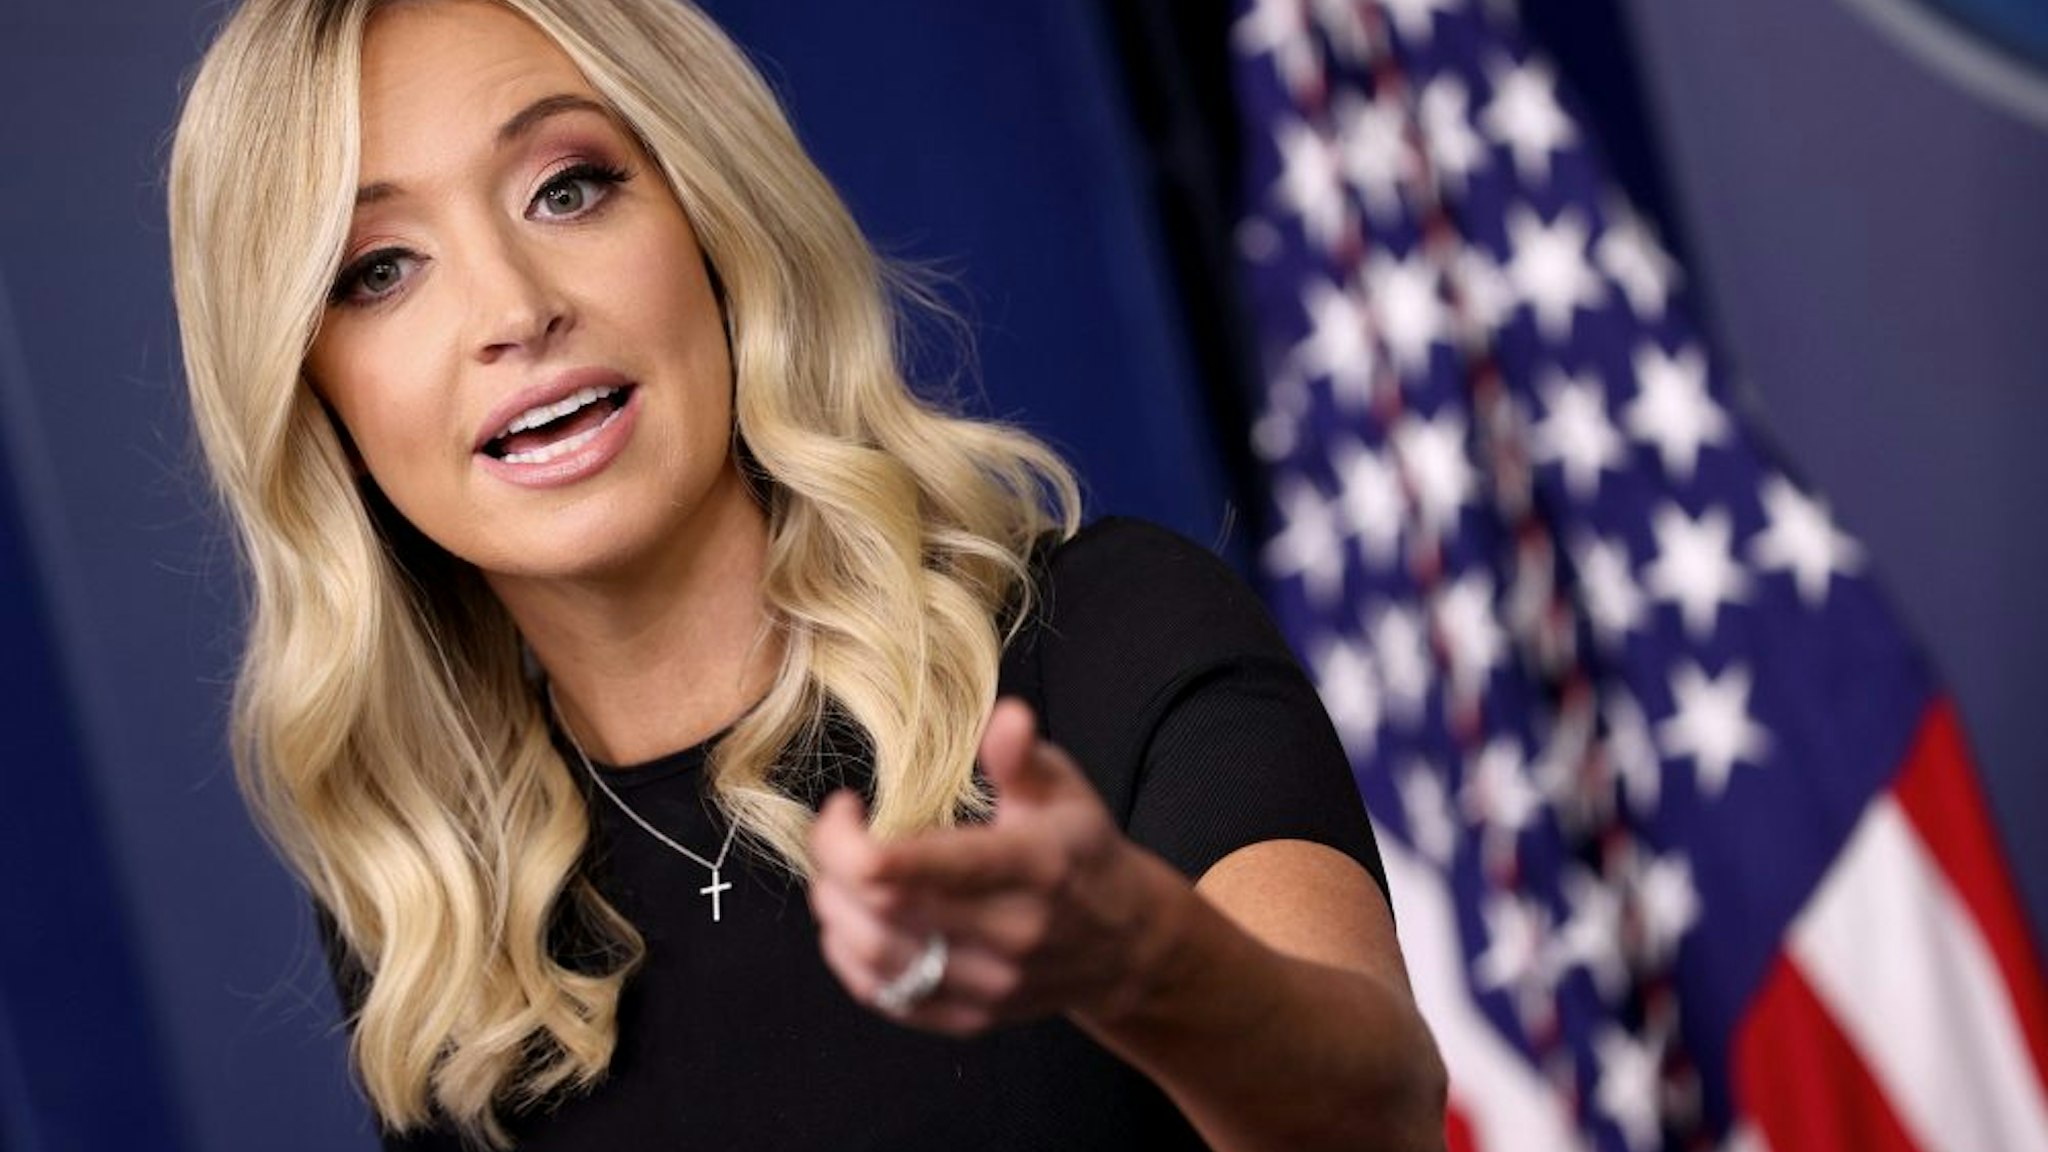 WASHINGTON, DC - MAY 26: White House press secretary Kayleigh McEnany answers questions during the daily briefing at the White House on May 26, 2020 in Washington, DC. McEnany answered a range of questions related primarily to the COVID-19 pandemic.